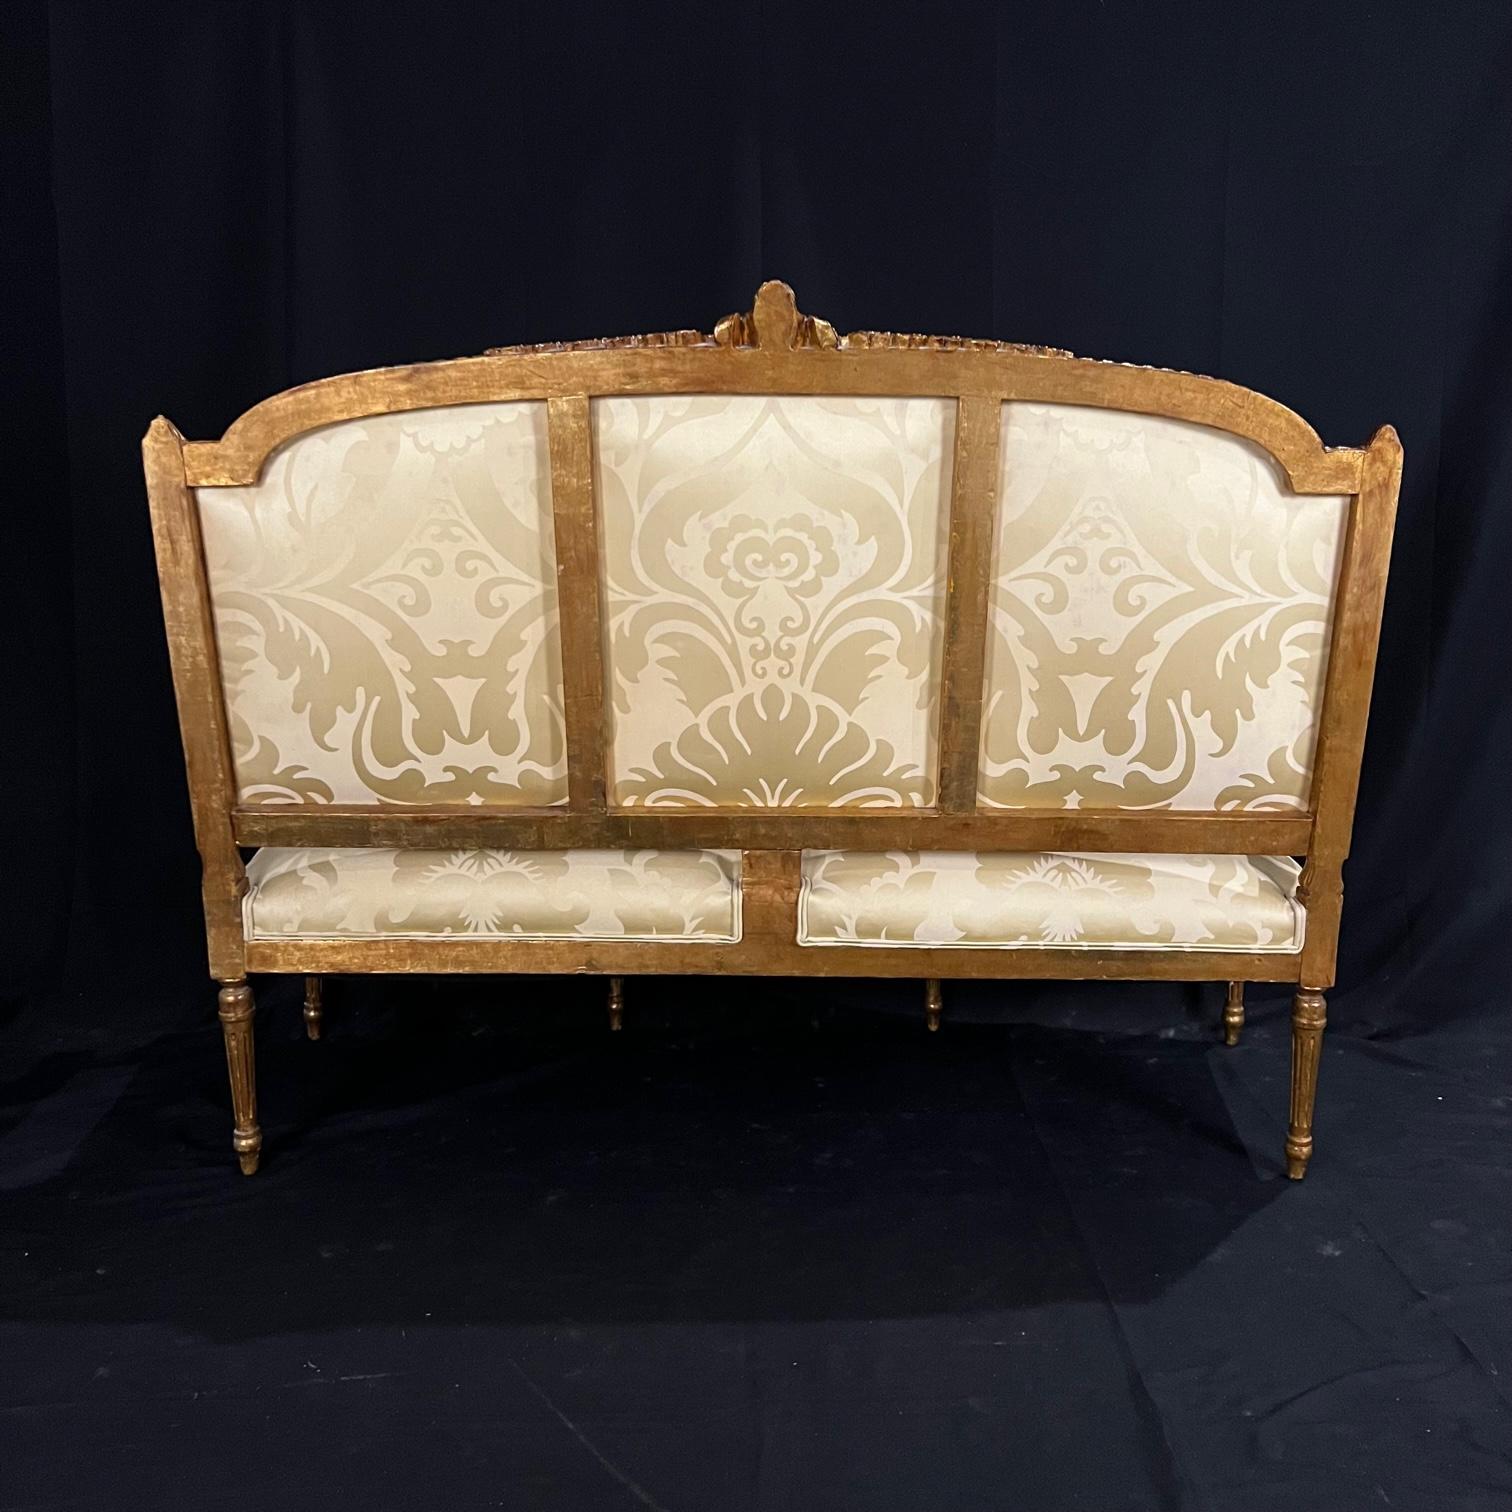 Louis XVI style sofa having carved gilded wood and beautiful new upholstery. The lovely frame displays fluted columns topped by acanthus leaves. The base is composed of fluted and tapered feet. The belt and the crosspieces are decorated with water